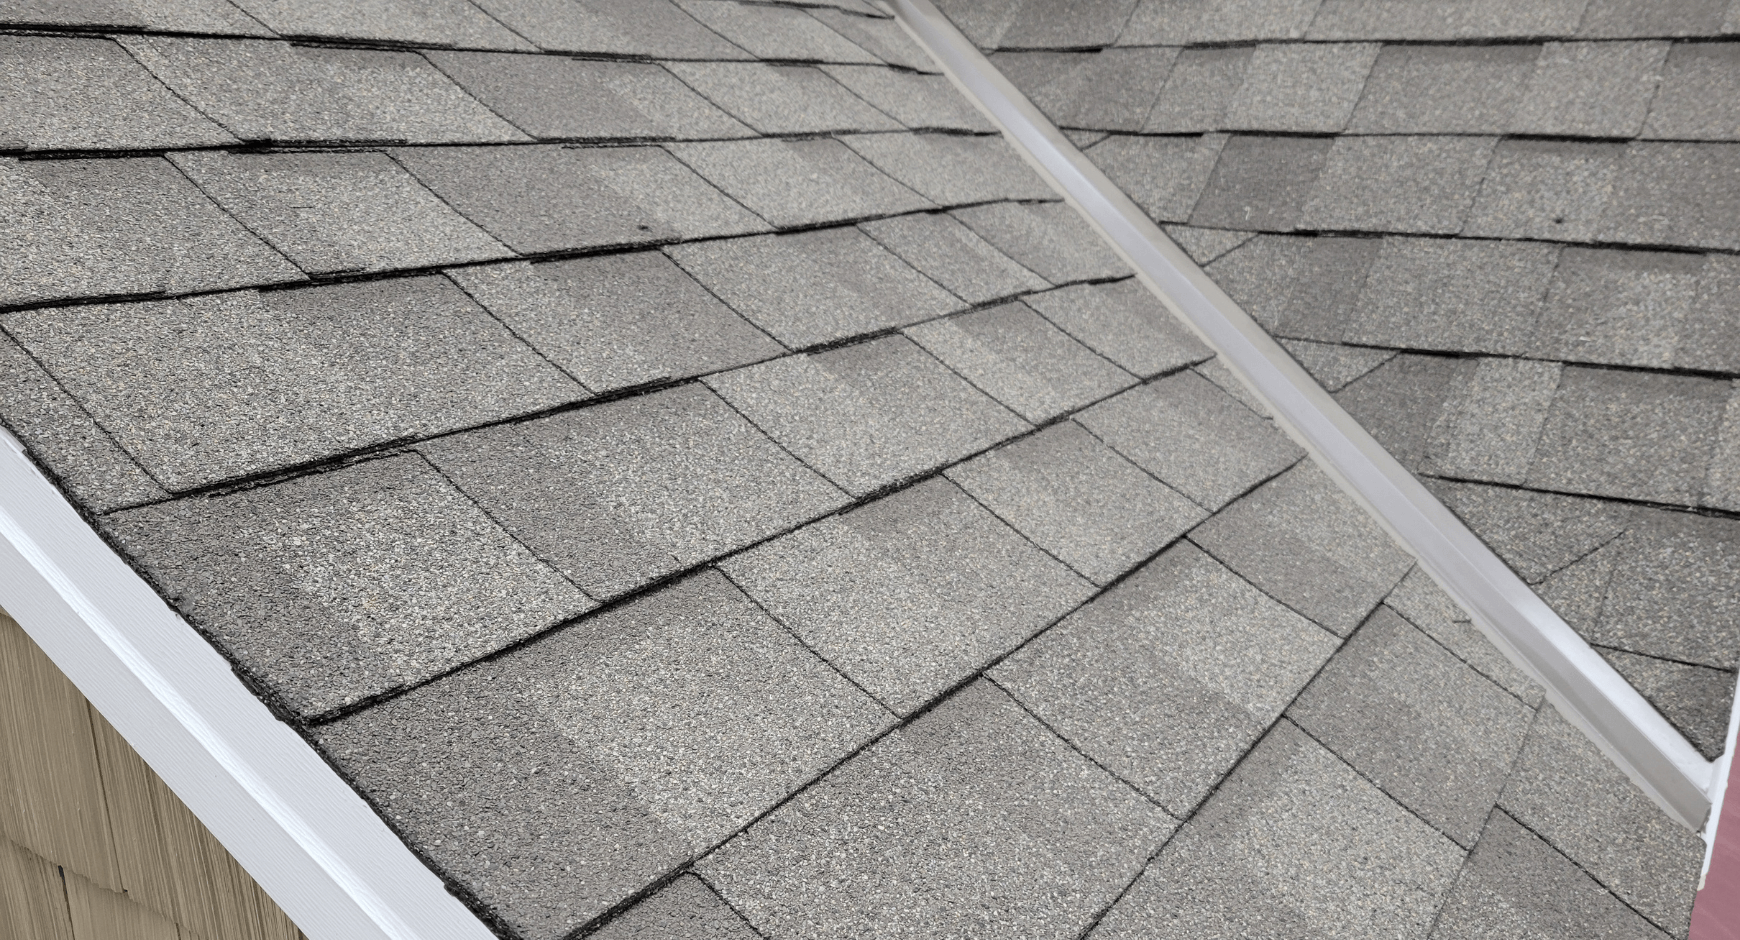 Getting your home ready for fall involves a roof inspection